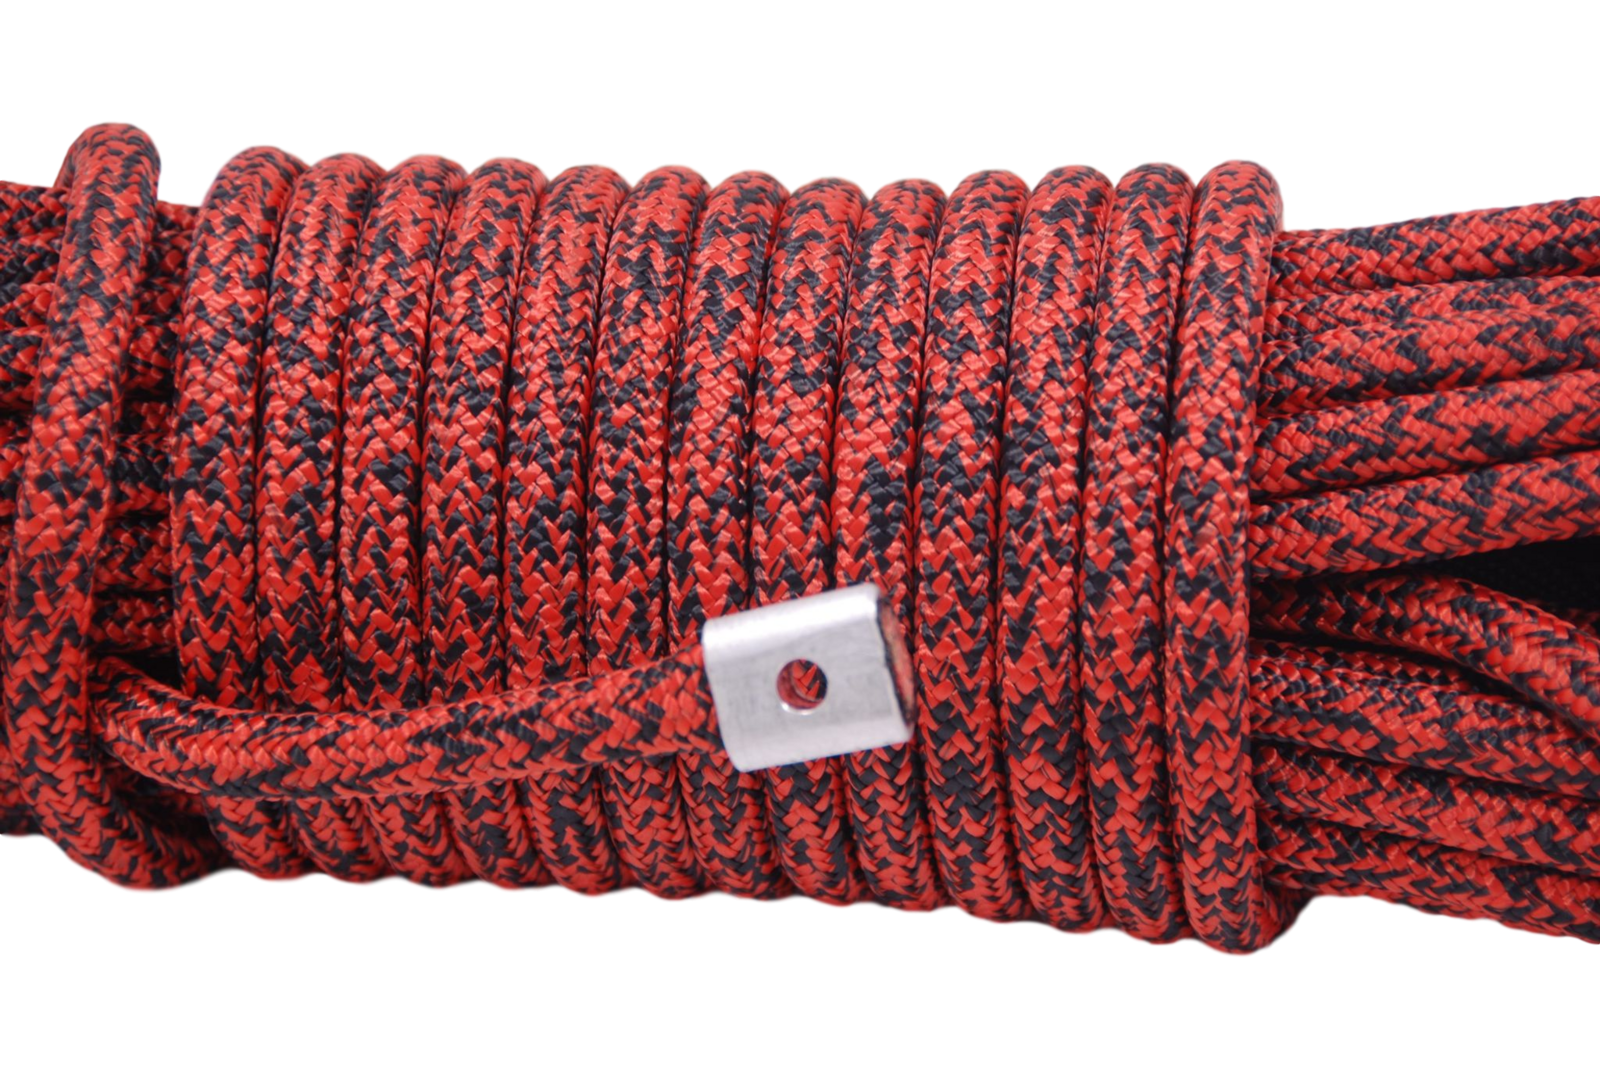 Carbon Offroad Next Gen 24 x 11mm Low mount winch rope kit - Red black mix colour